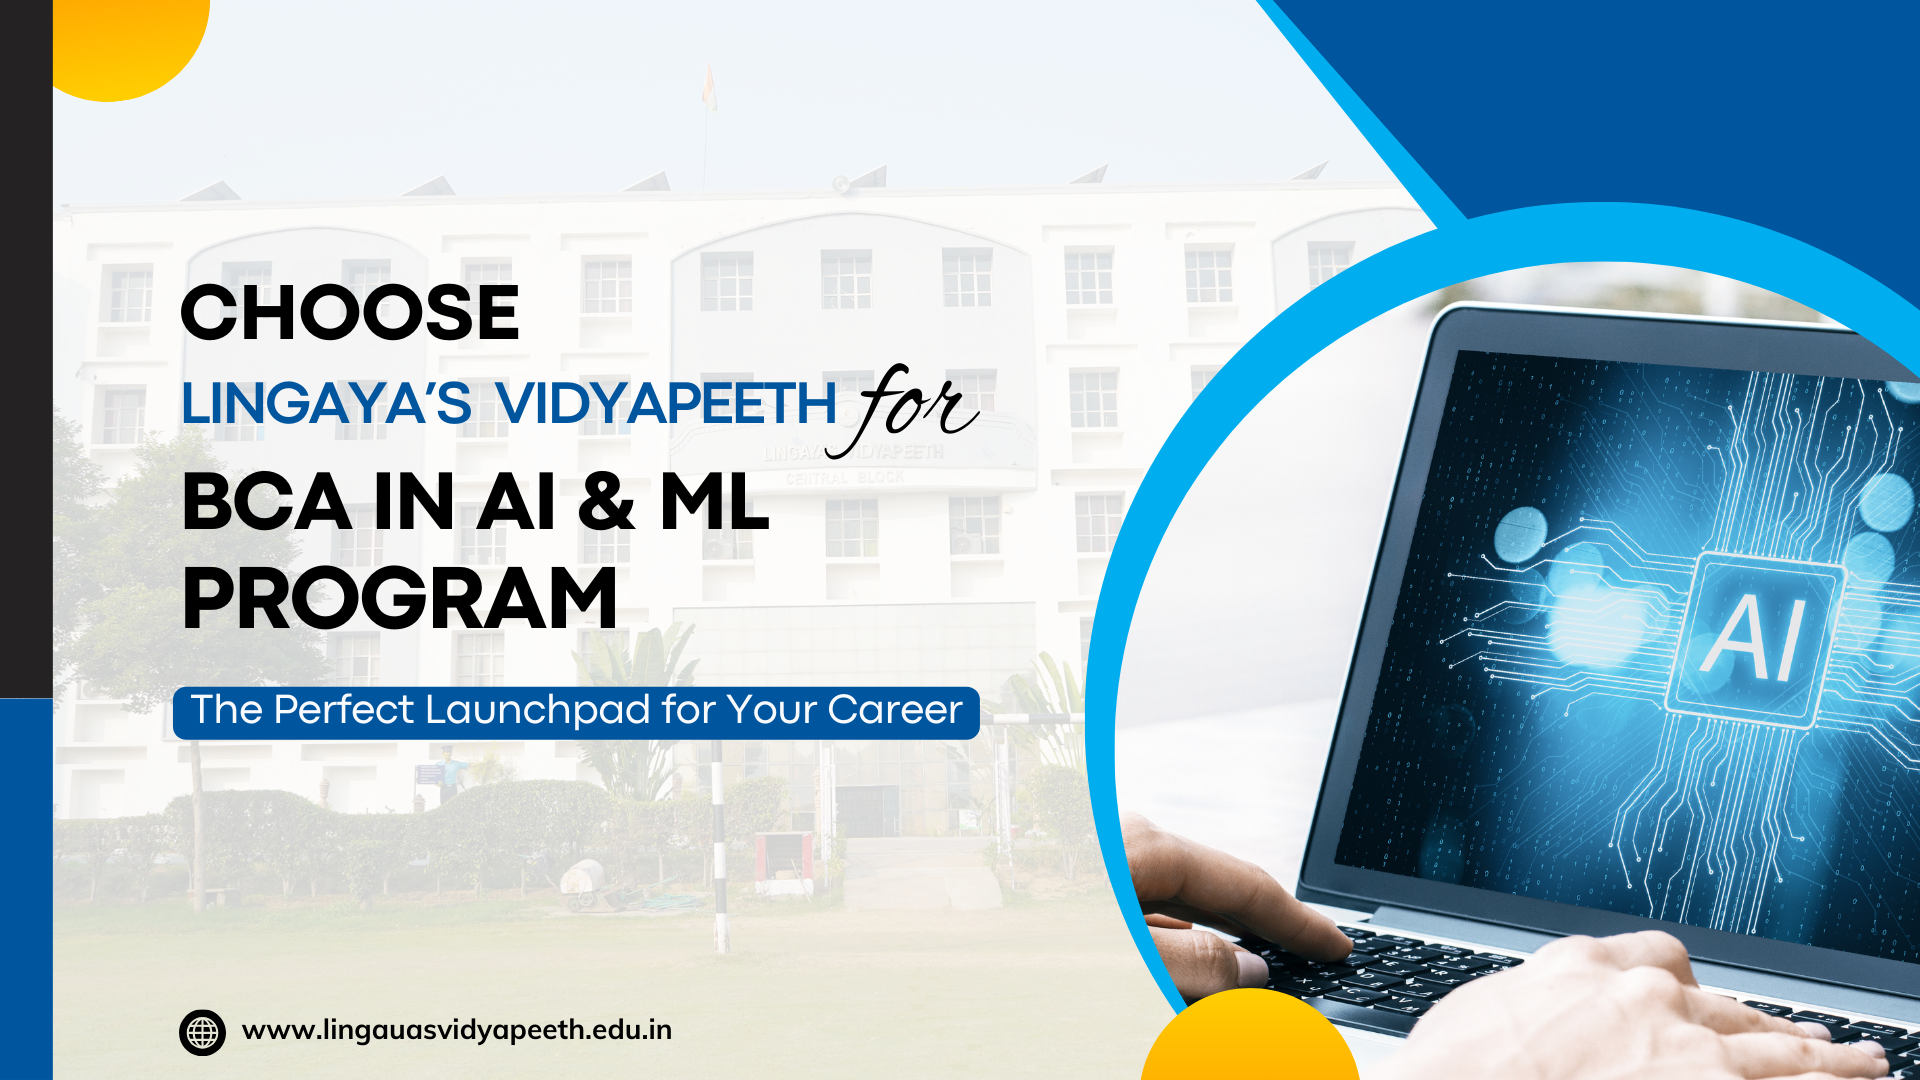 Why BCA in AI & ML is the Perfect Launchpad for Your Career?